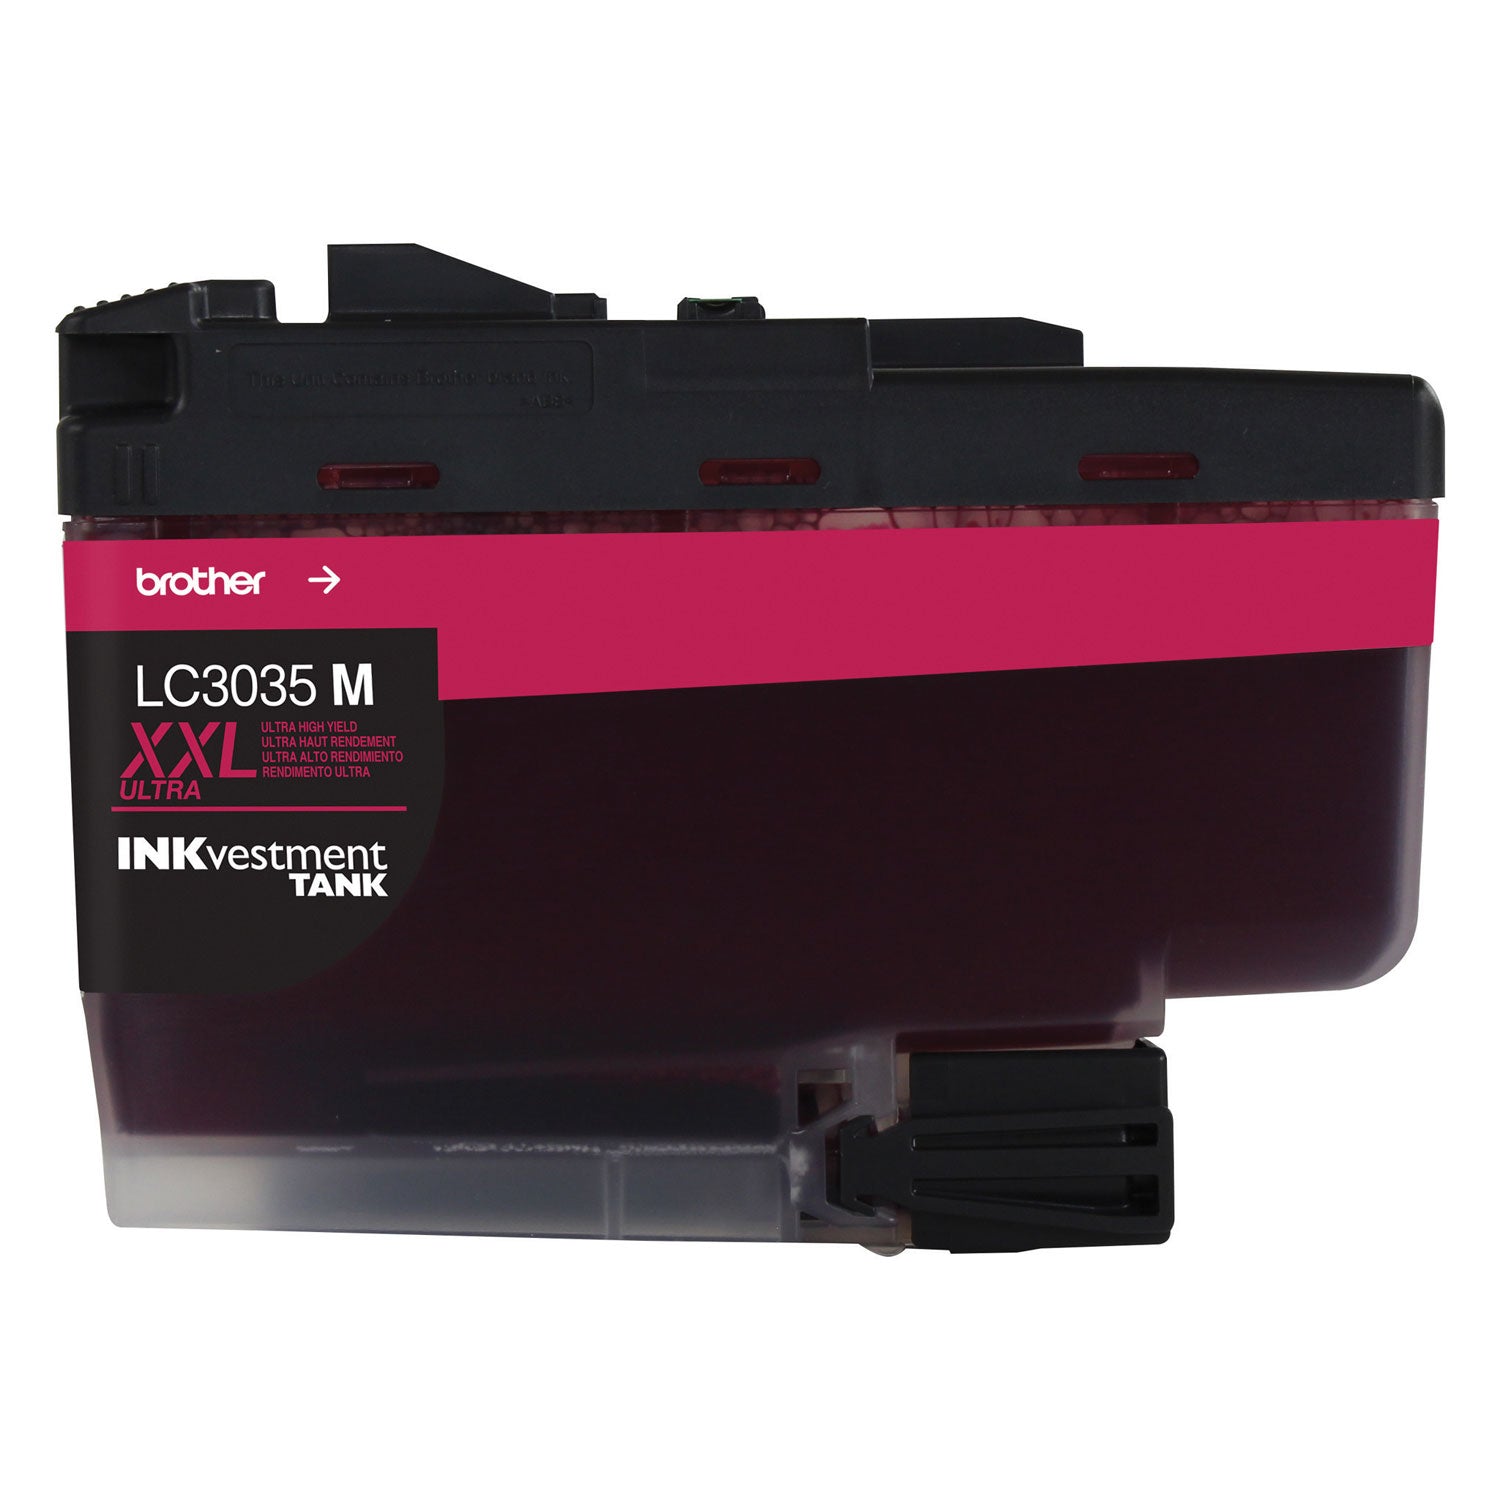 lc3035m-inkvestment-ultra-high-yield-ink-5000-page-yield-magenta_brtlc3035m - 2